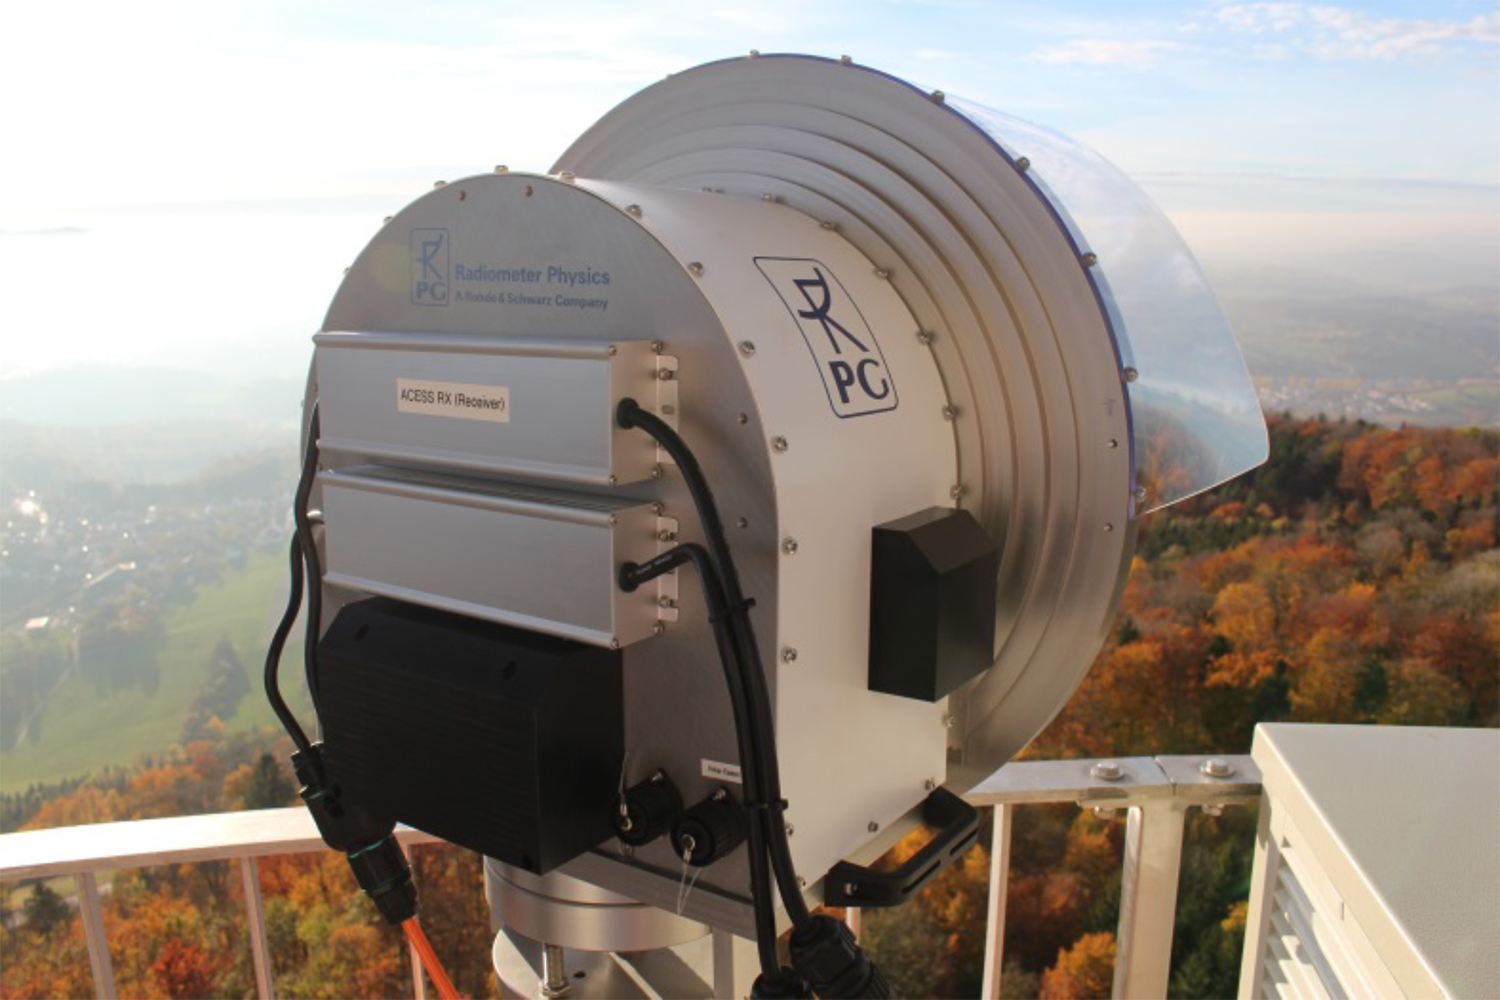 The high millimeter wave frequency range offers multi-Gigahertz bandwidths to satisfy 5G+ front- and backhaul links.